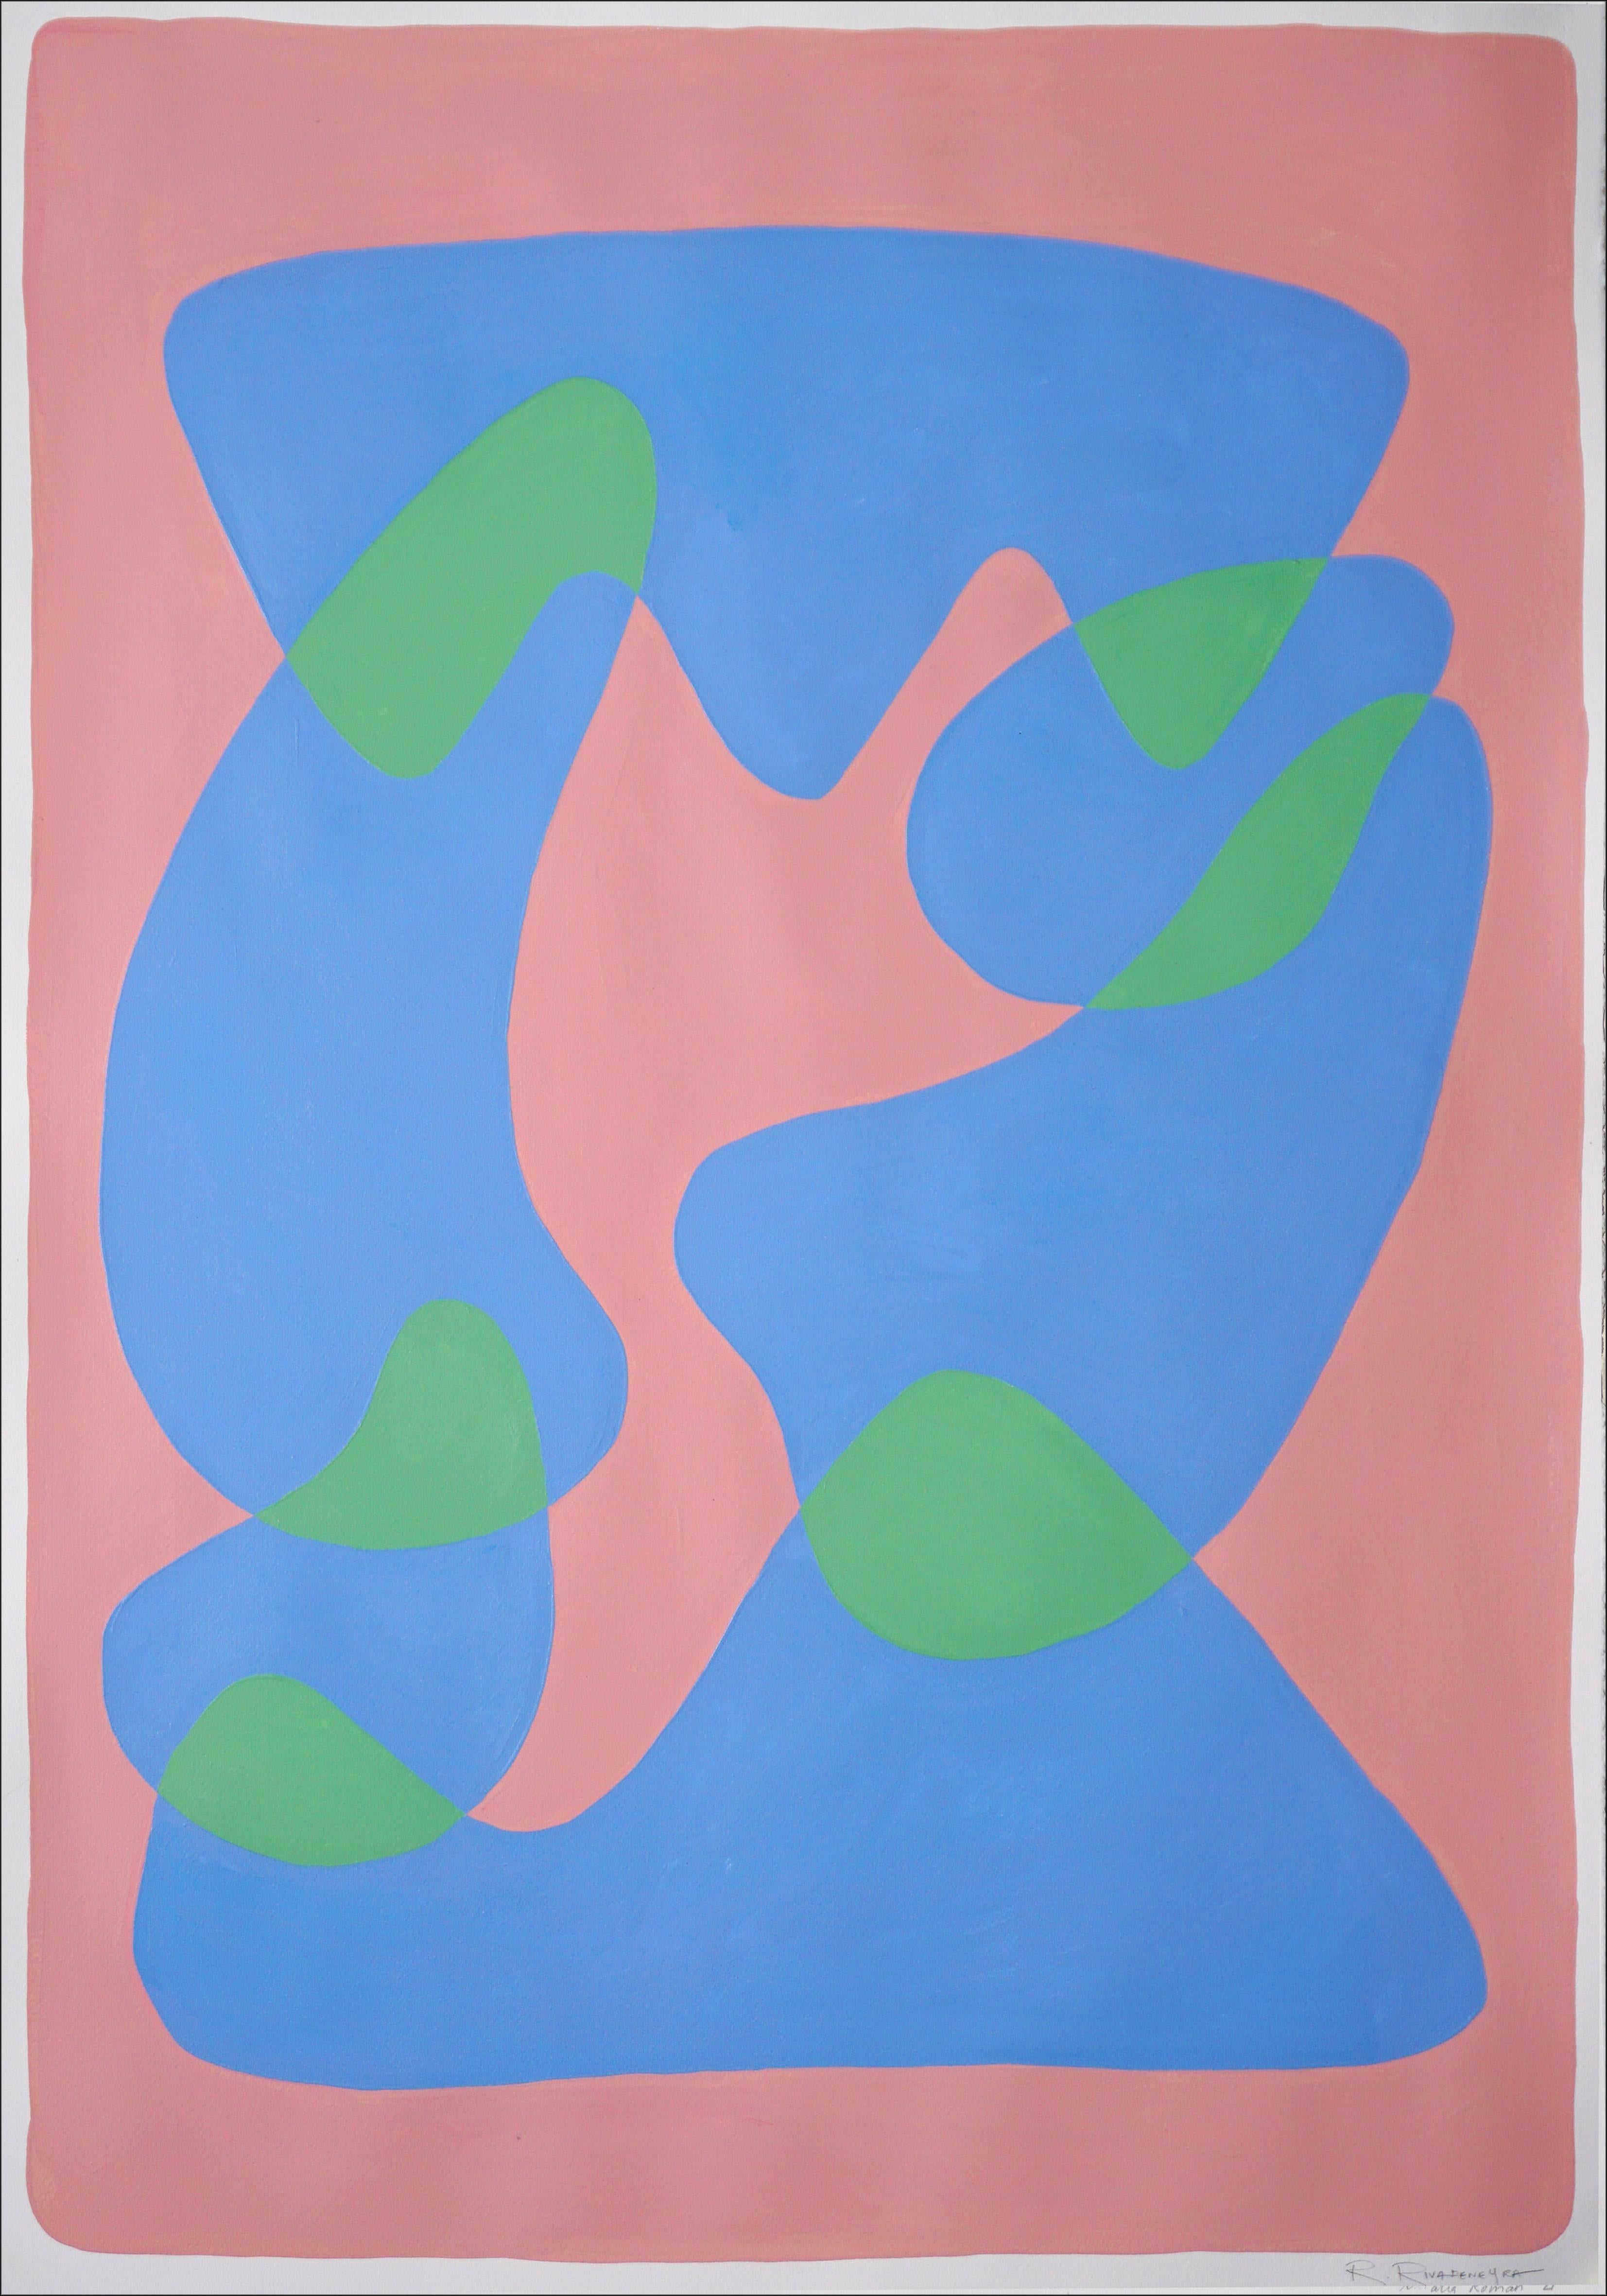 Primary Colors and Primary Shapes, Pink, Blue and Green, Pastel Tones Figures 